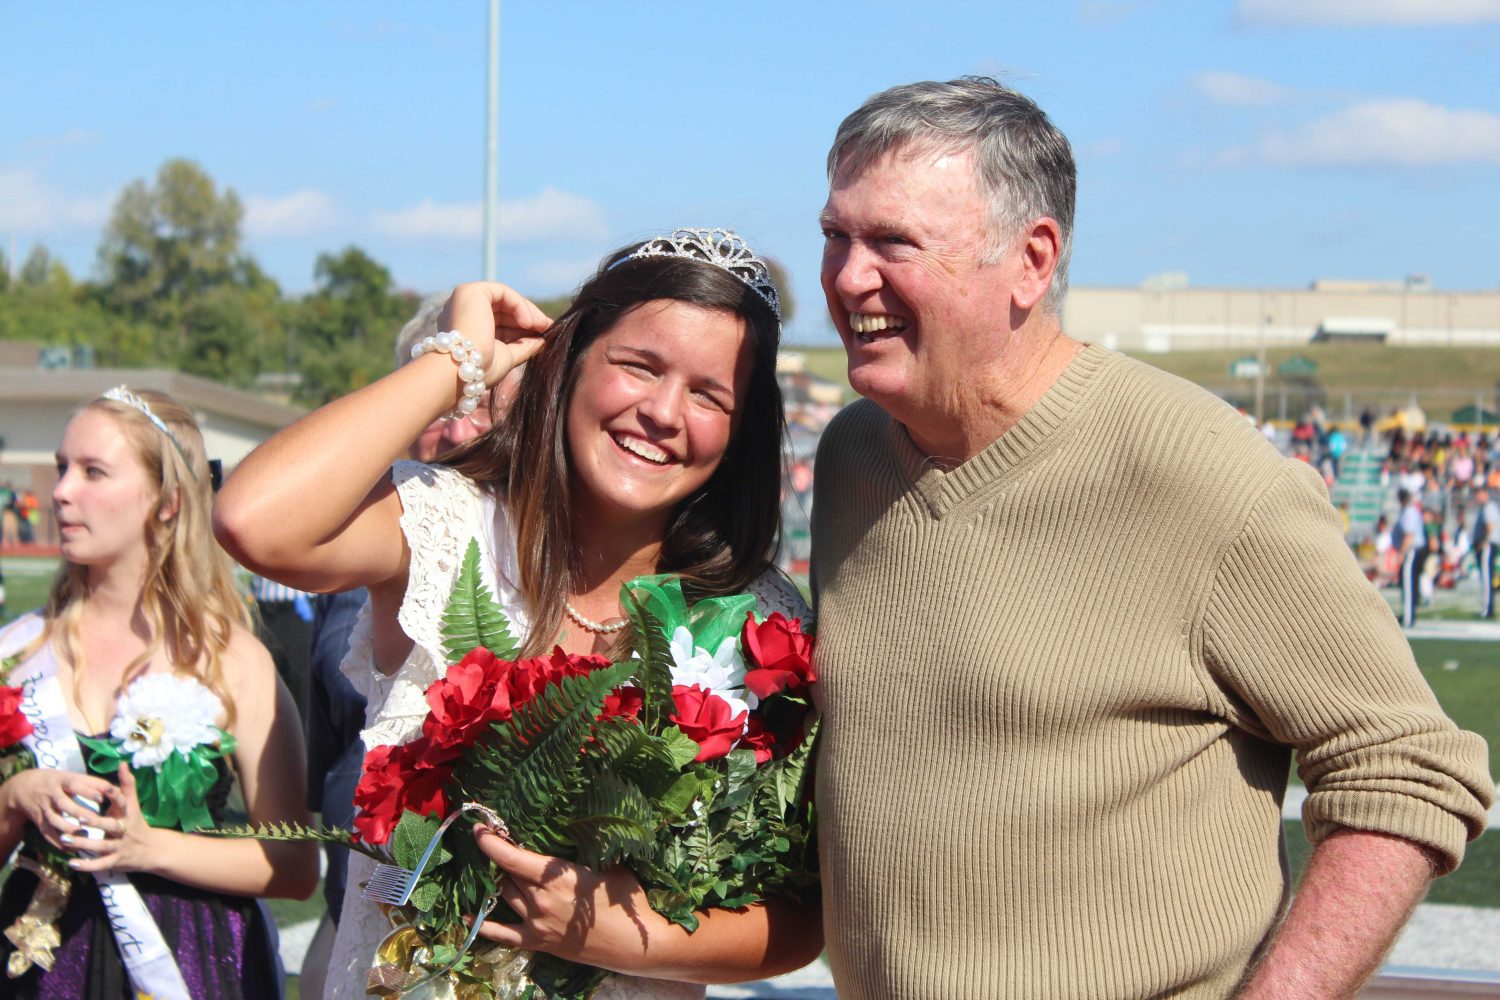 Nikki Callahan was named the 2013 Homecoming Queen during halftime at the football game. (File photo)